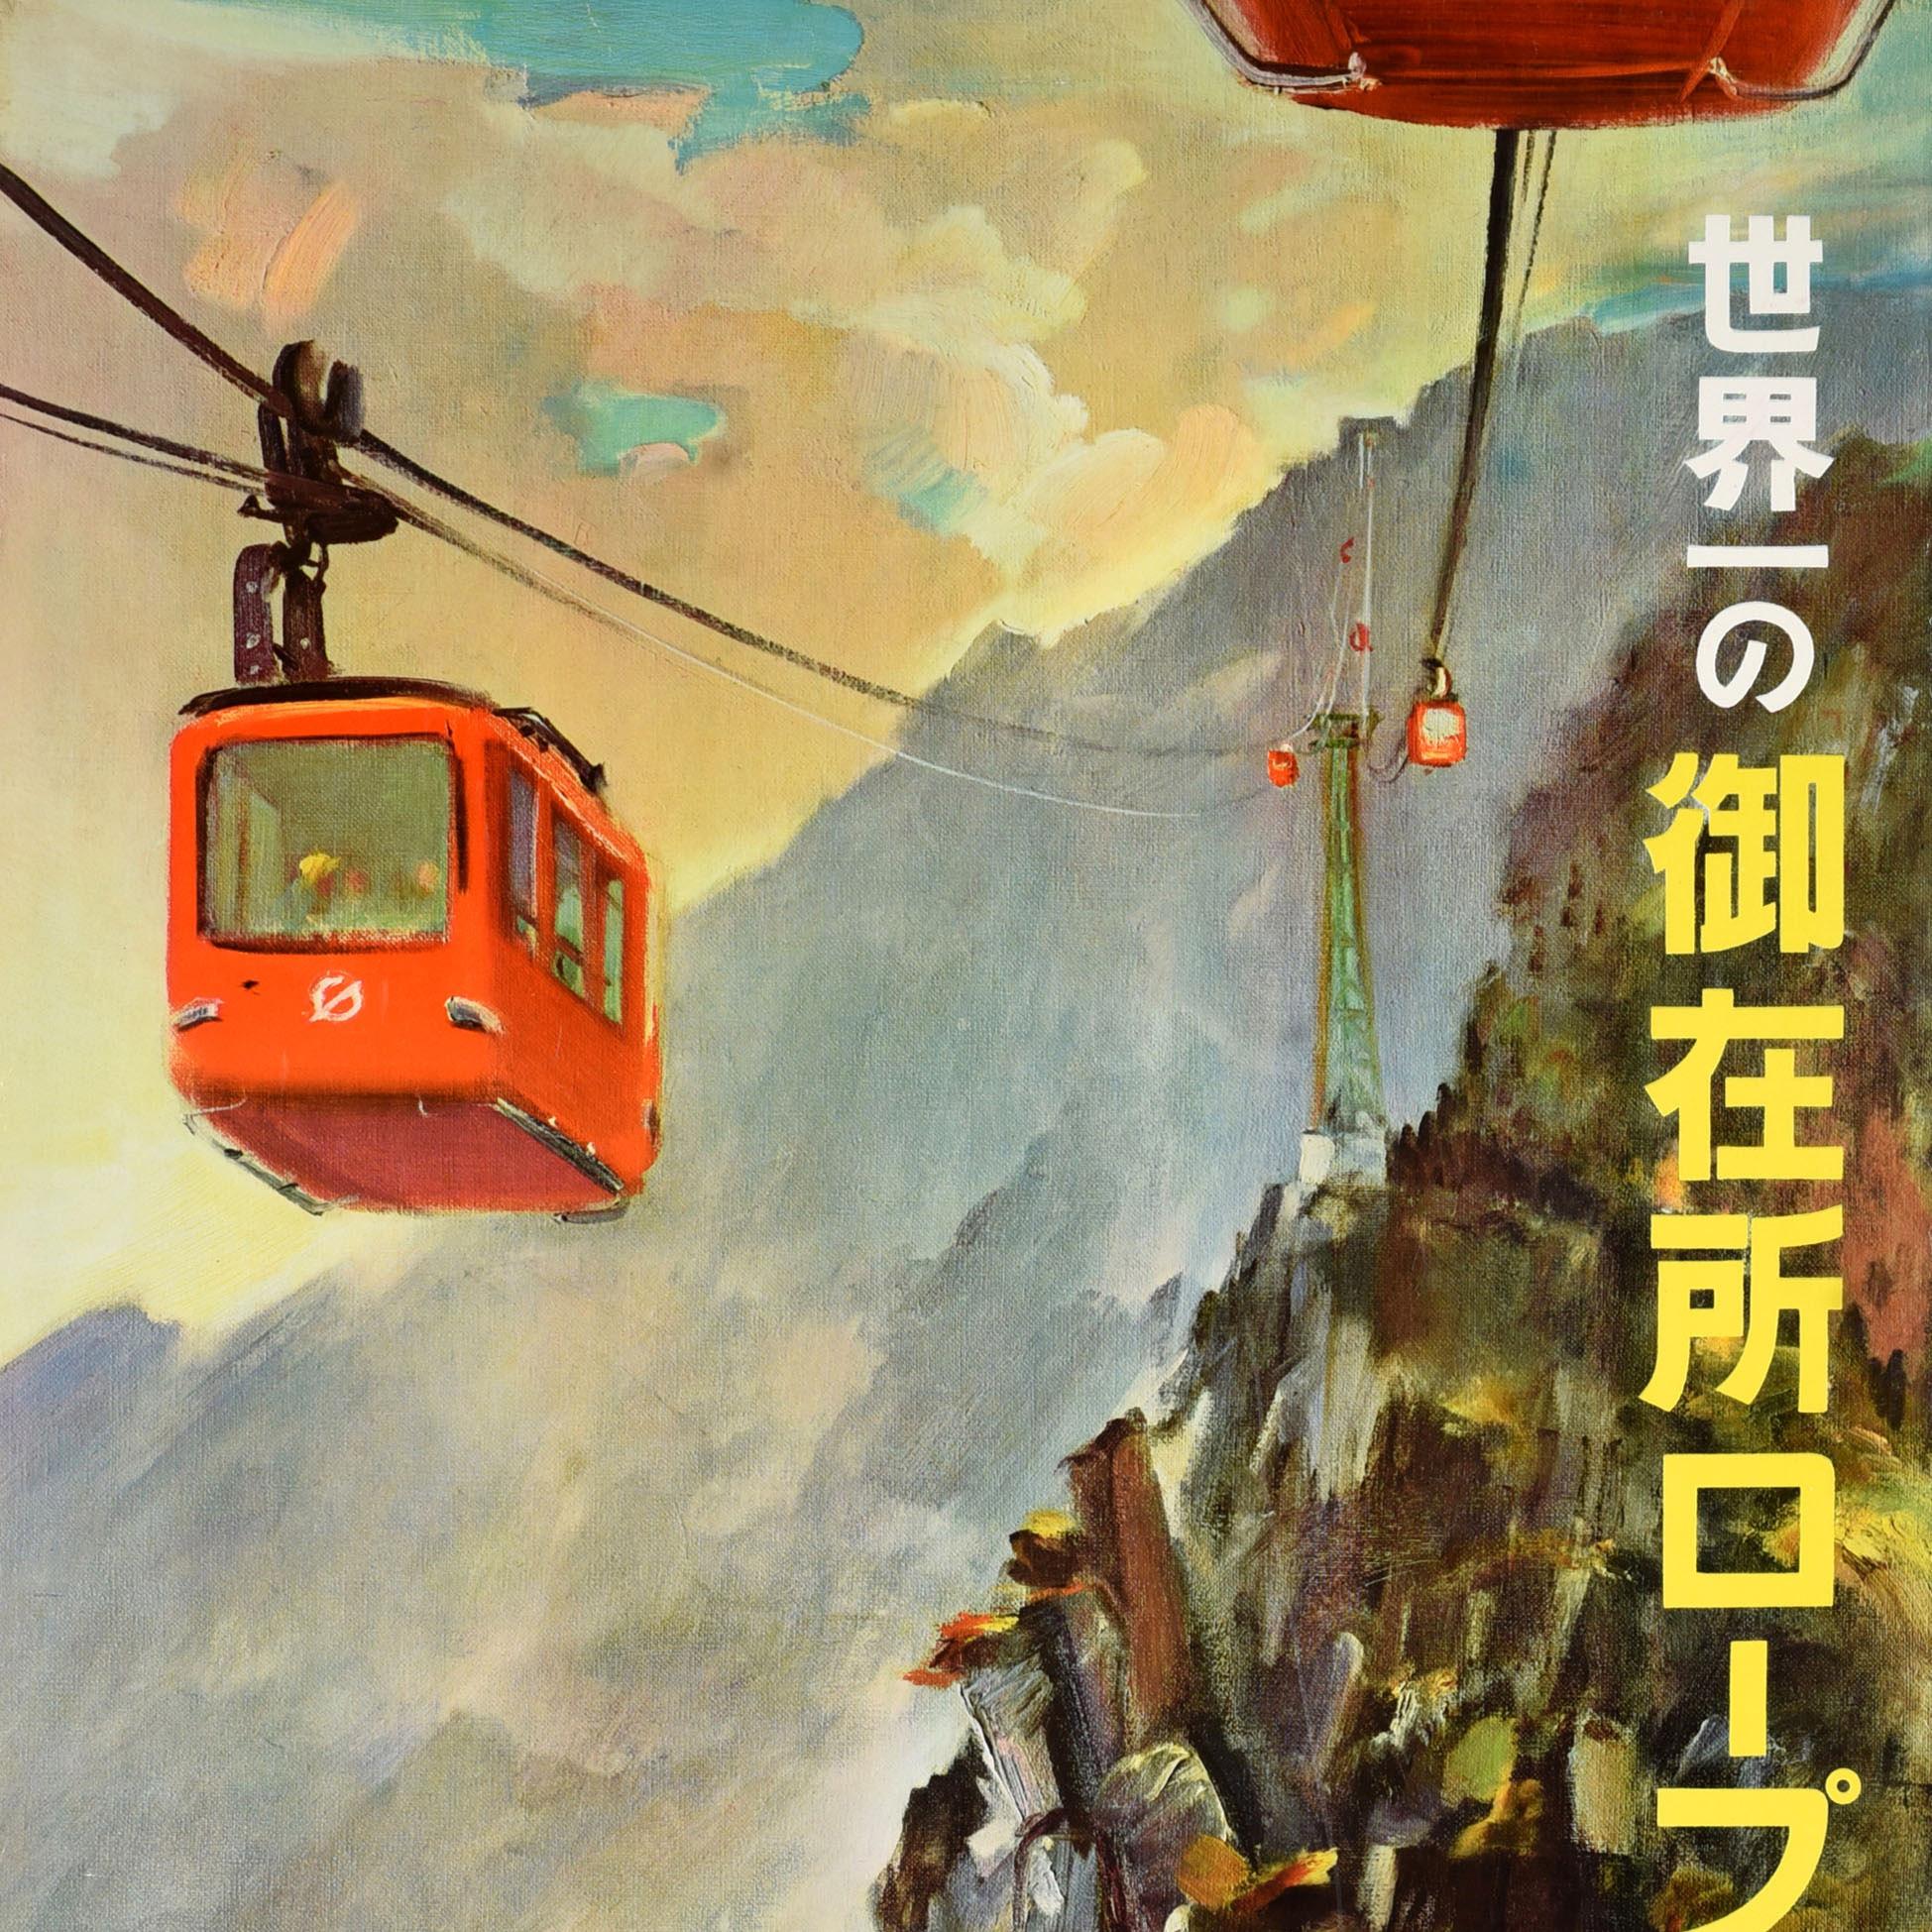 Original vintage Asia travel poster for the Gozaisho Ropeway 御在所ロープウェイ in Japan featuring people in red cable car cabins travelling up and down the mountain with the colourful forest below. Opened in 1959, the Mount Gozaisho Ropeway is a Japanese